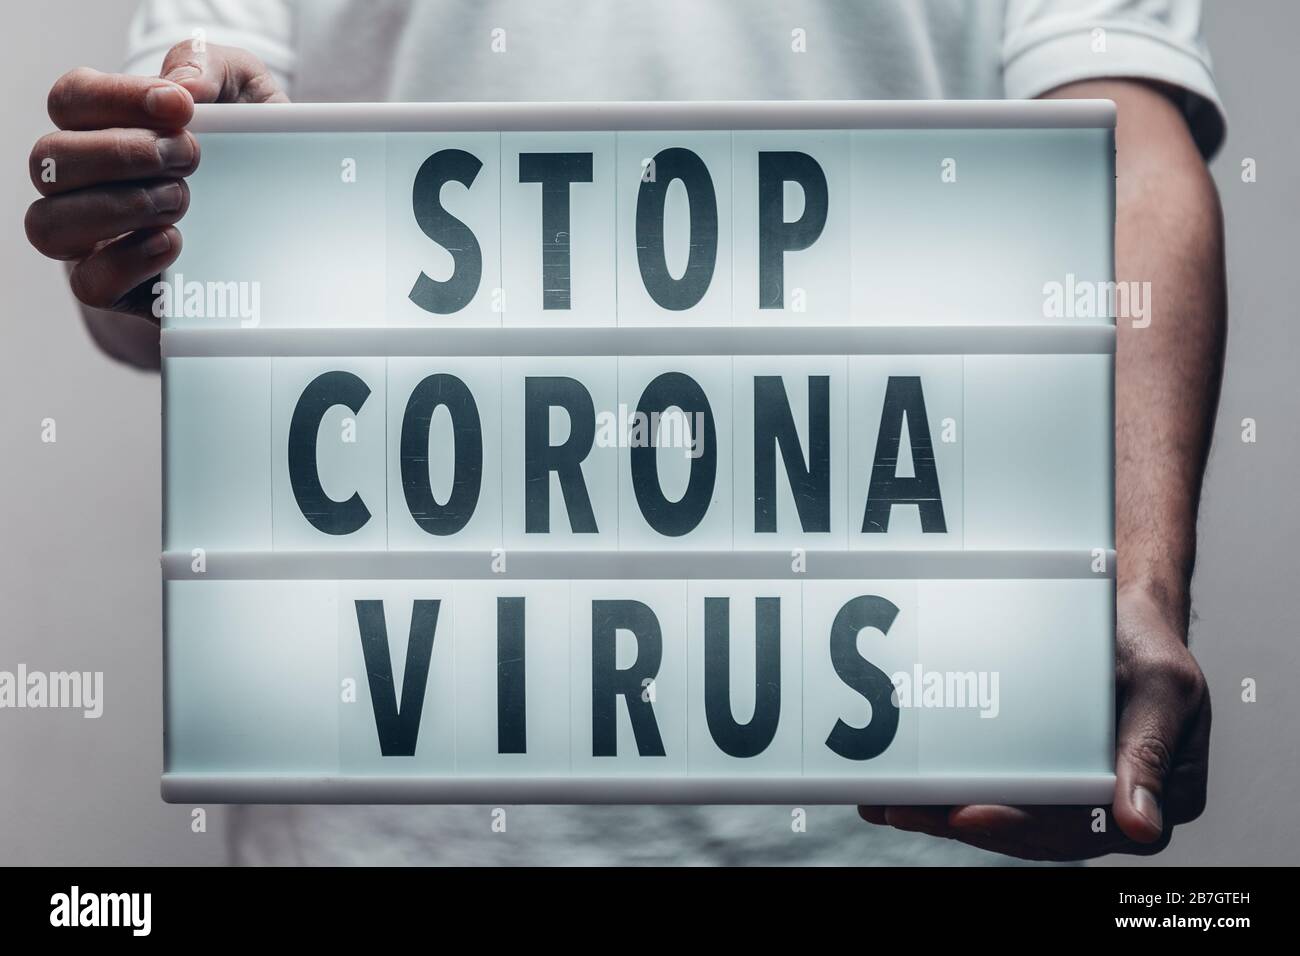 Adult male holding a lightbox text with a message 'Stop Corona Virus' written. Stock Photo